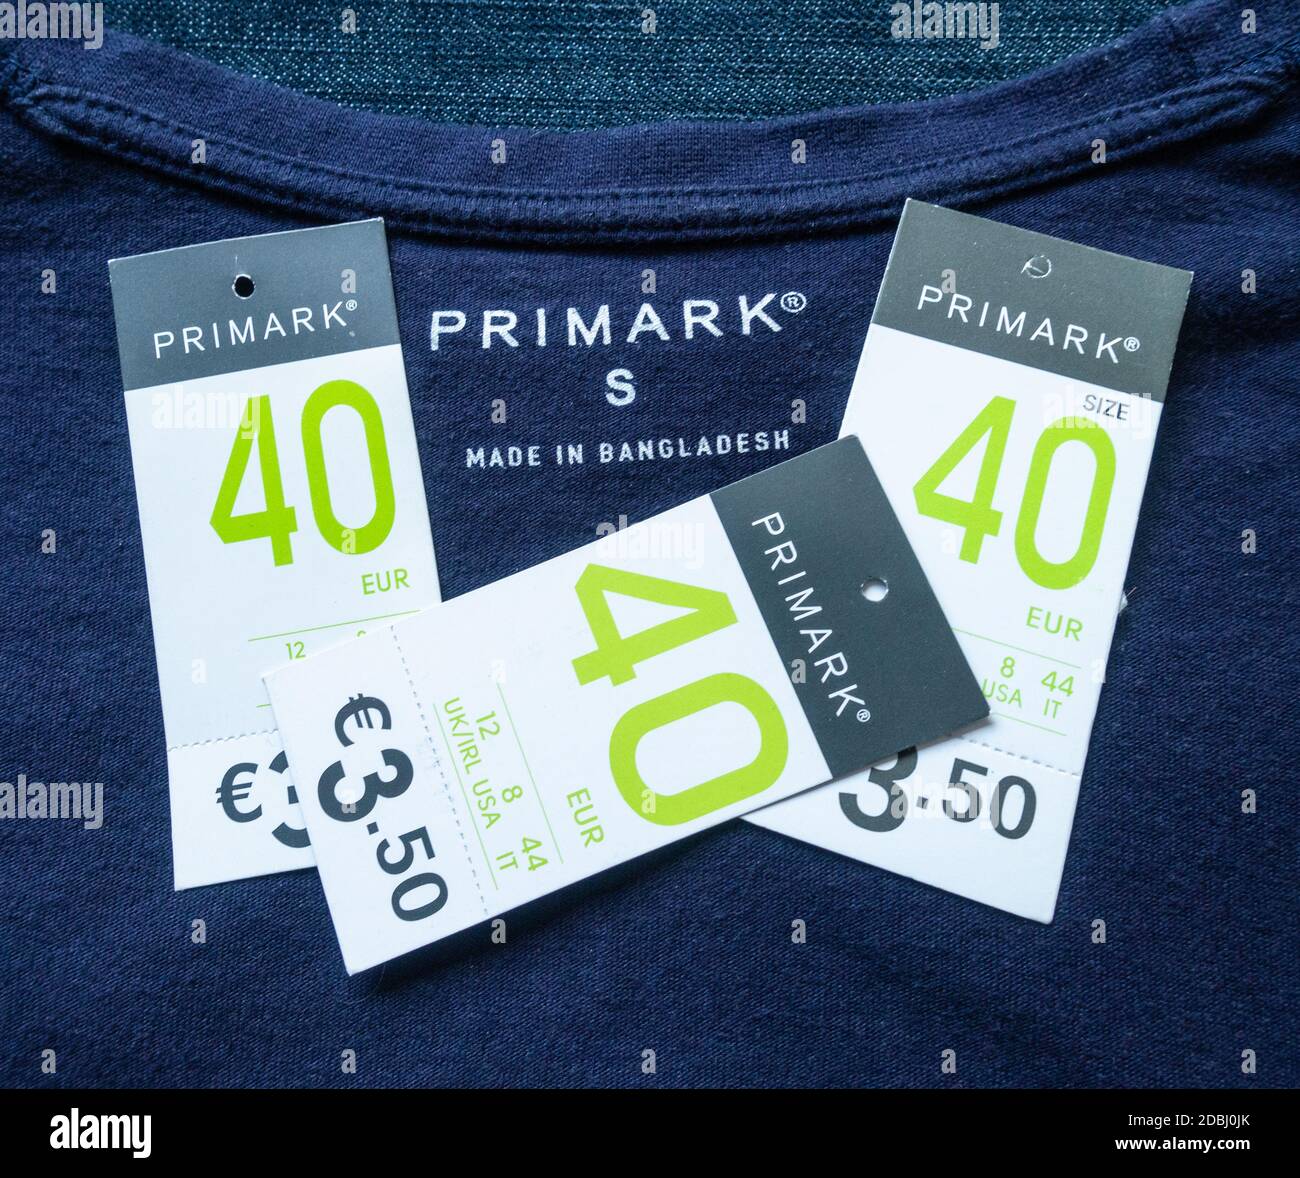 Primark T shirt made in Bangladesh with Primark size, price tags. Stock Photo